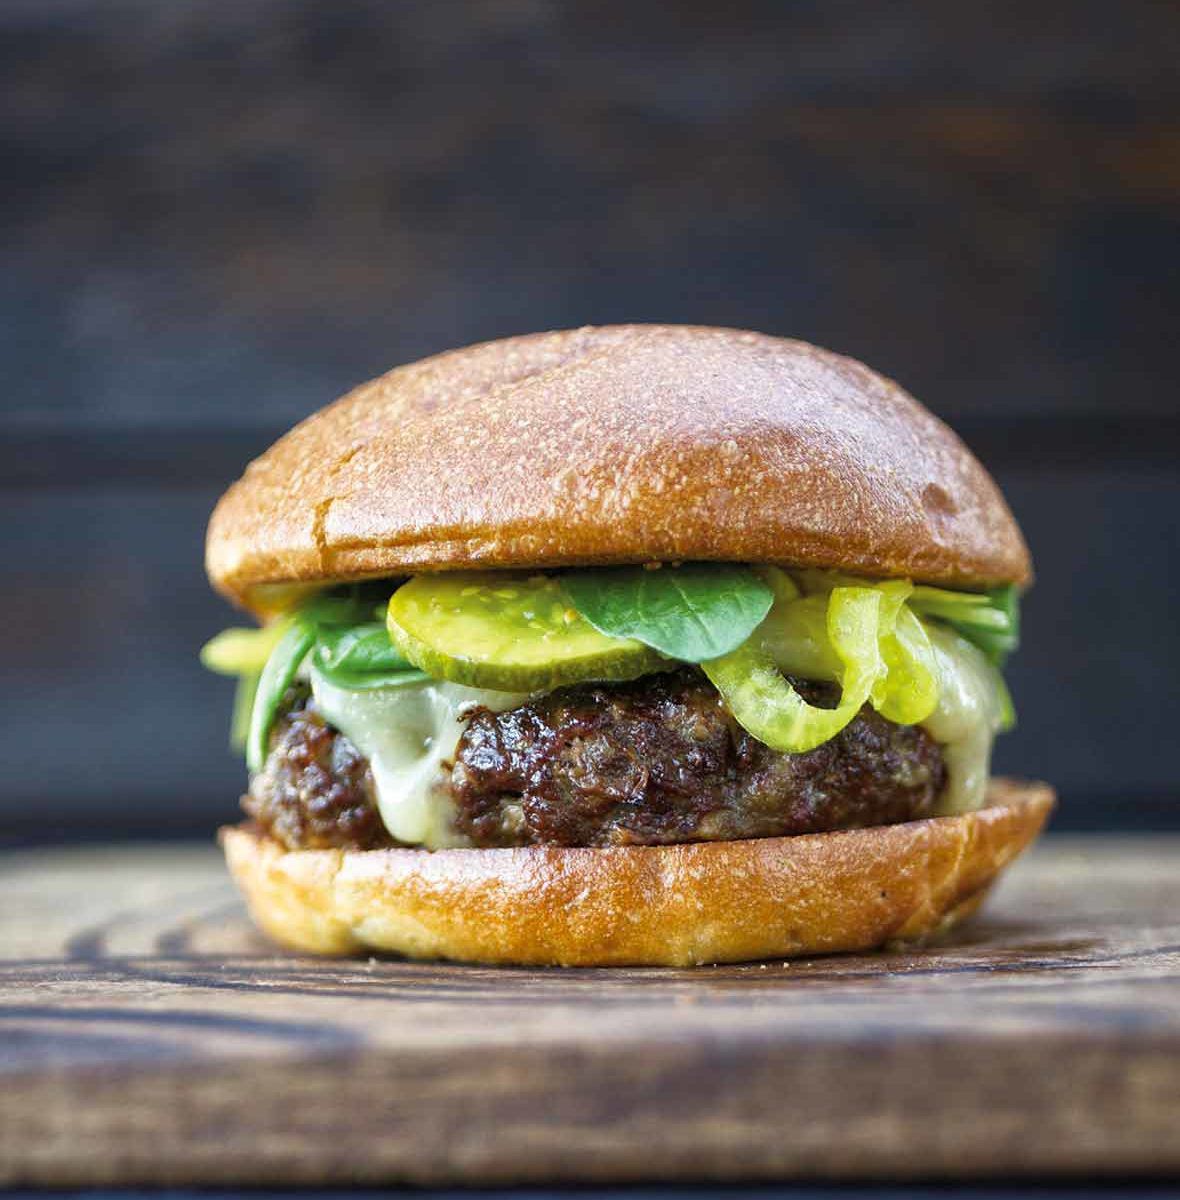 Beef Burger Recipe Without Worcestershire Sauce ...